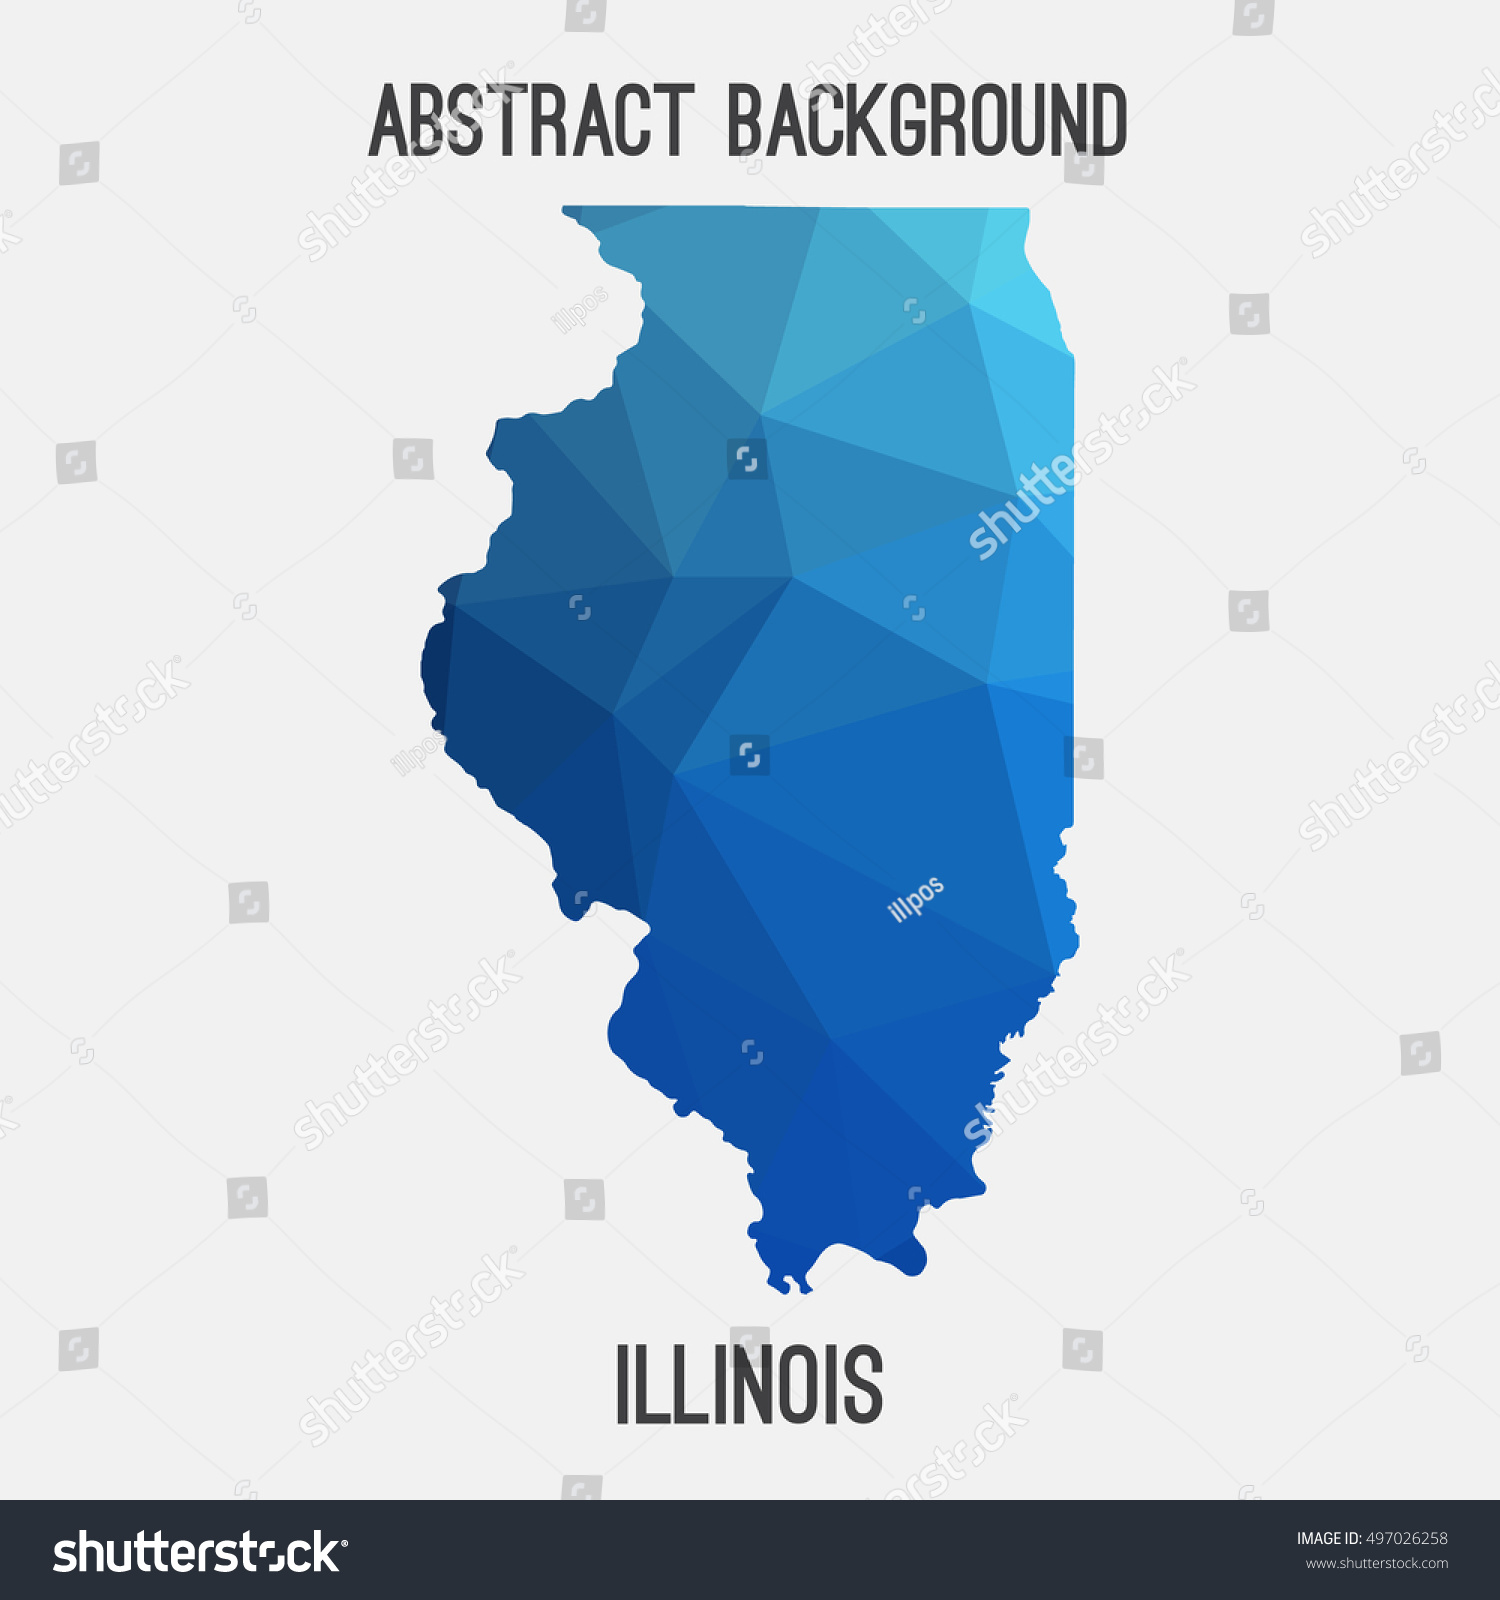 SVG of Illinois map in geometric polygonal,mosaic style.Abstract tessellation,modern design background,low poly. Vector illustration. svg